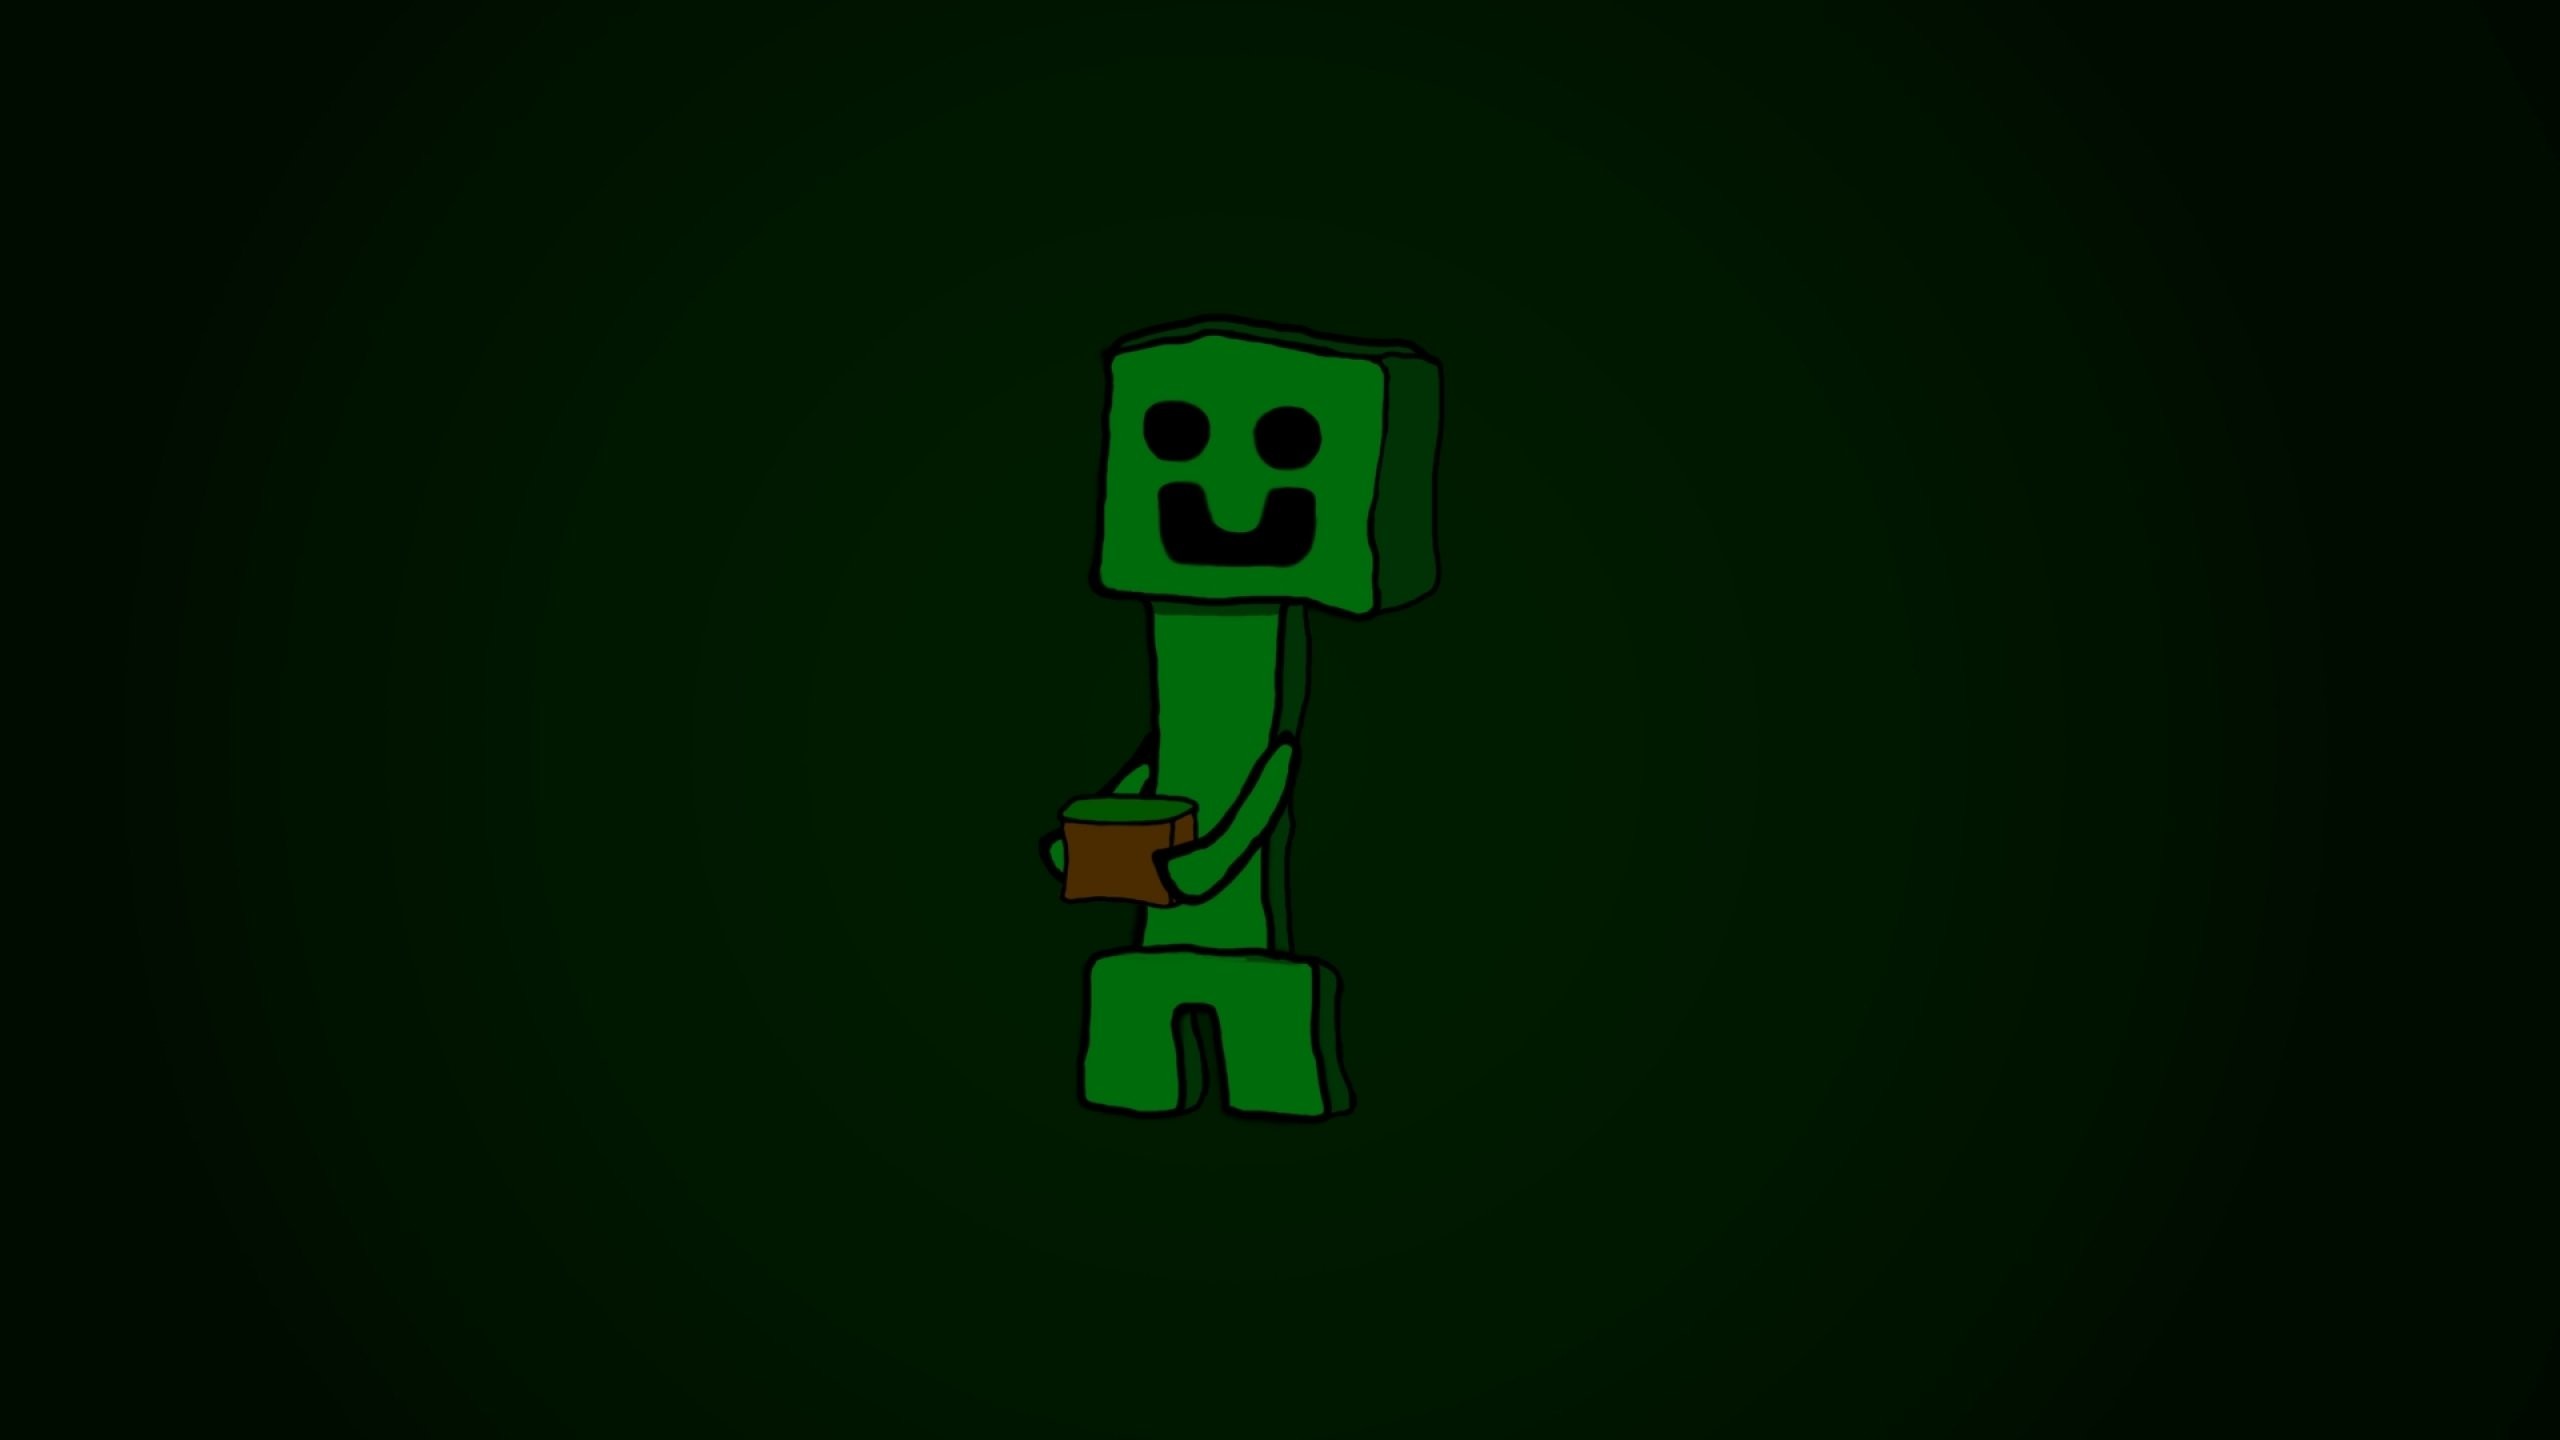 2560x1440 wallpaper.wiki--Minecraft-Creeper-Iphone-Image-PIC-